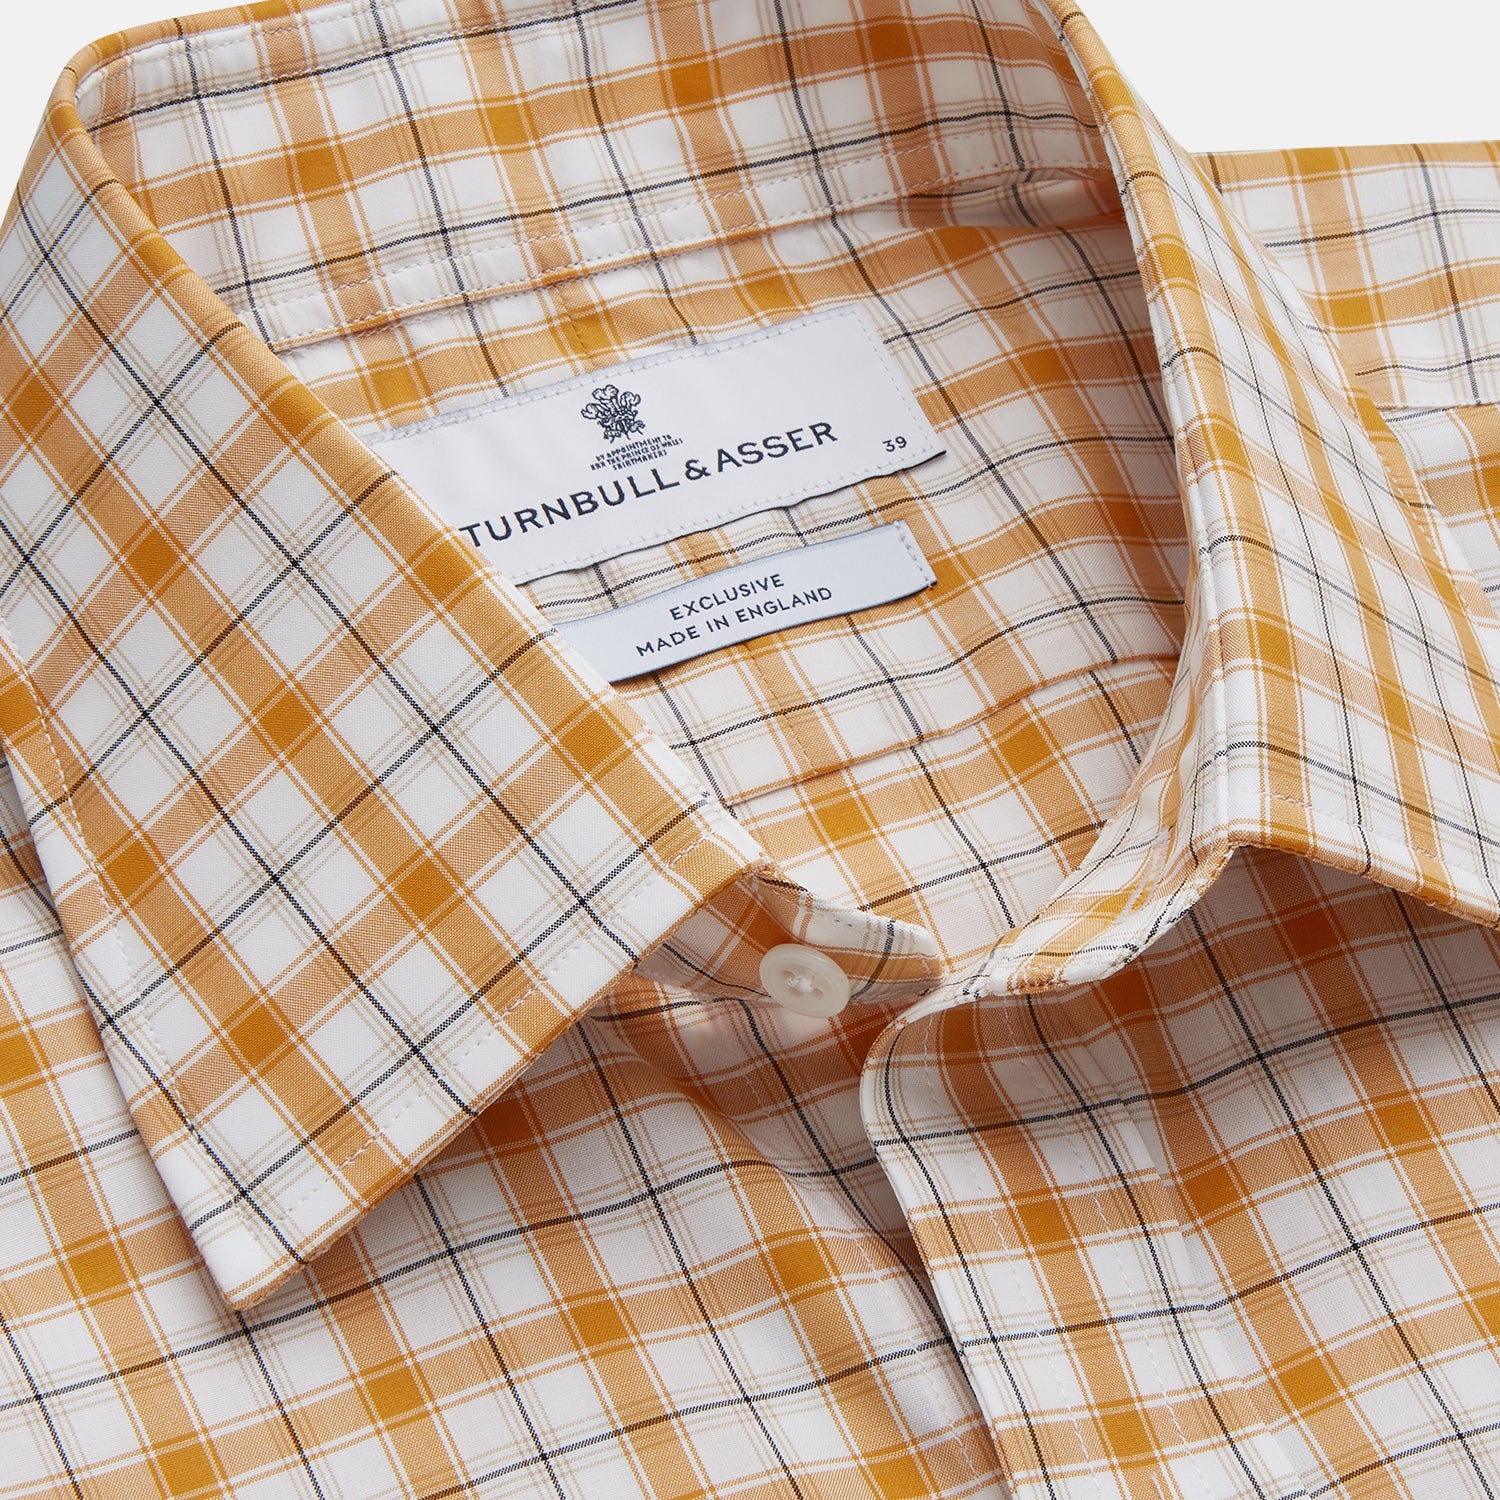 Orange Multi Check Regular Fit Shirt with T&A Collar and 3 Button Cuffs